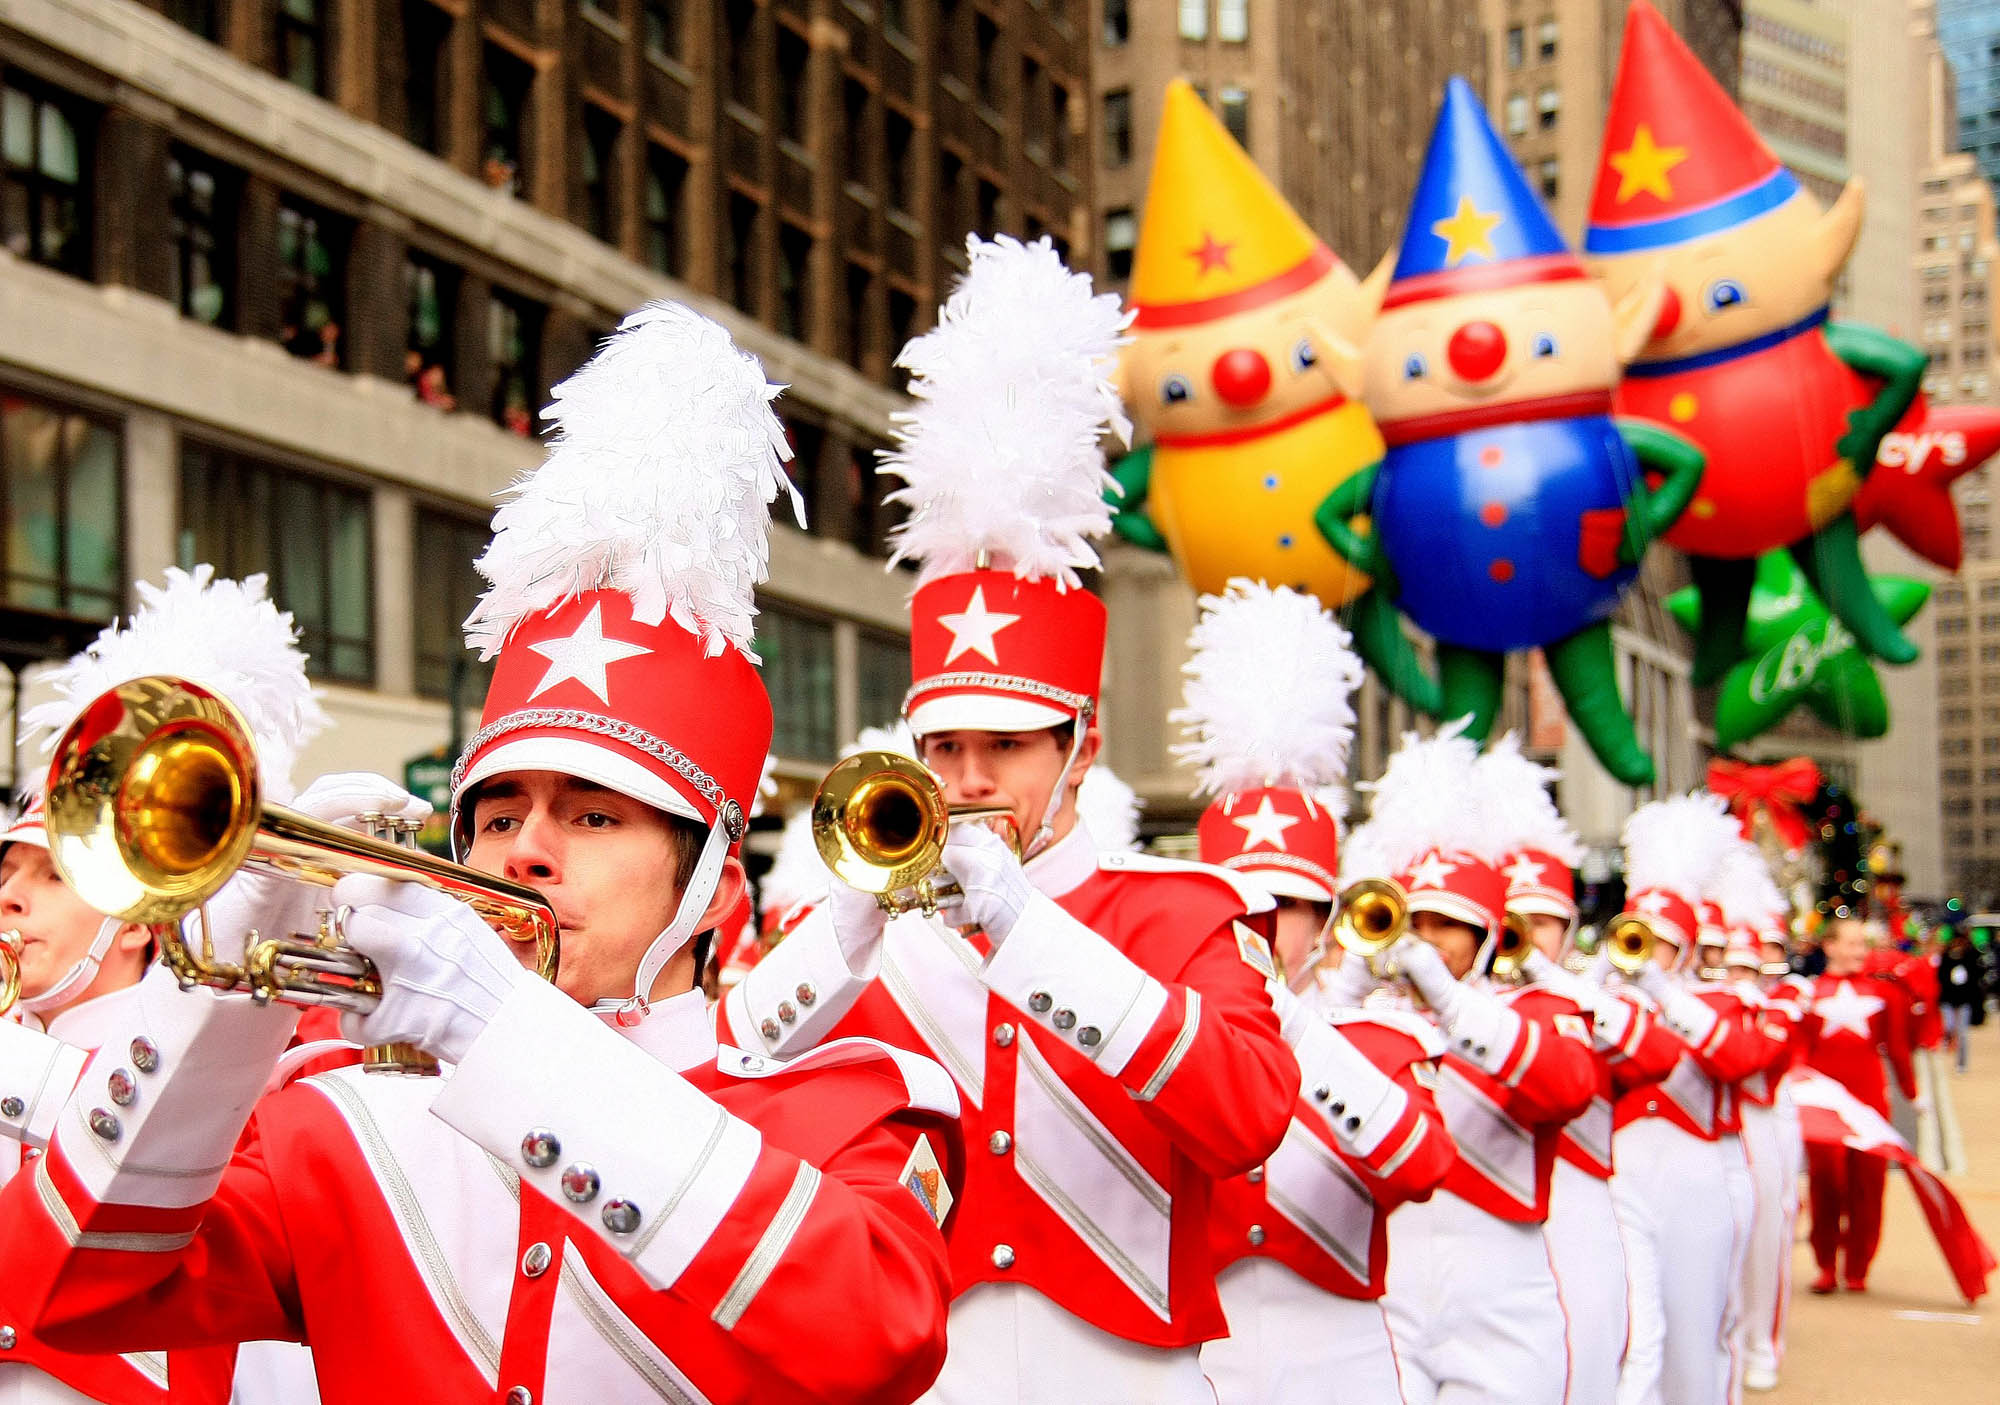 Macyâ€™s Thanksgiving Day Parade â€“ Marching Bands 2013 | Virtual ...